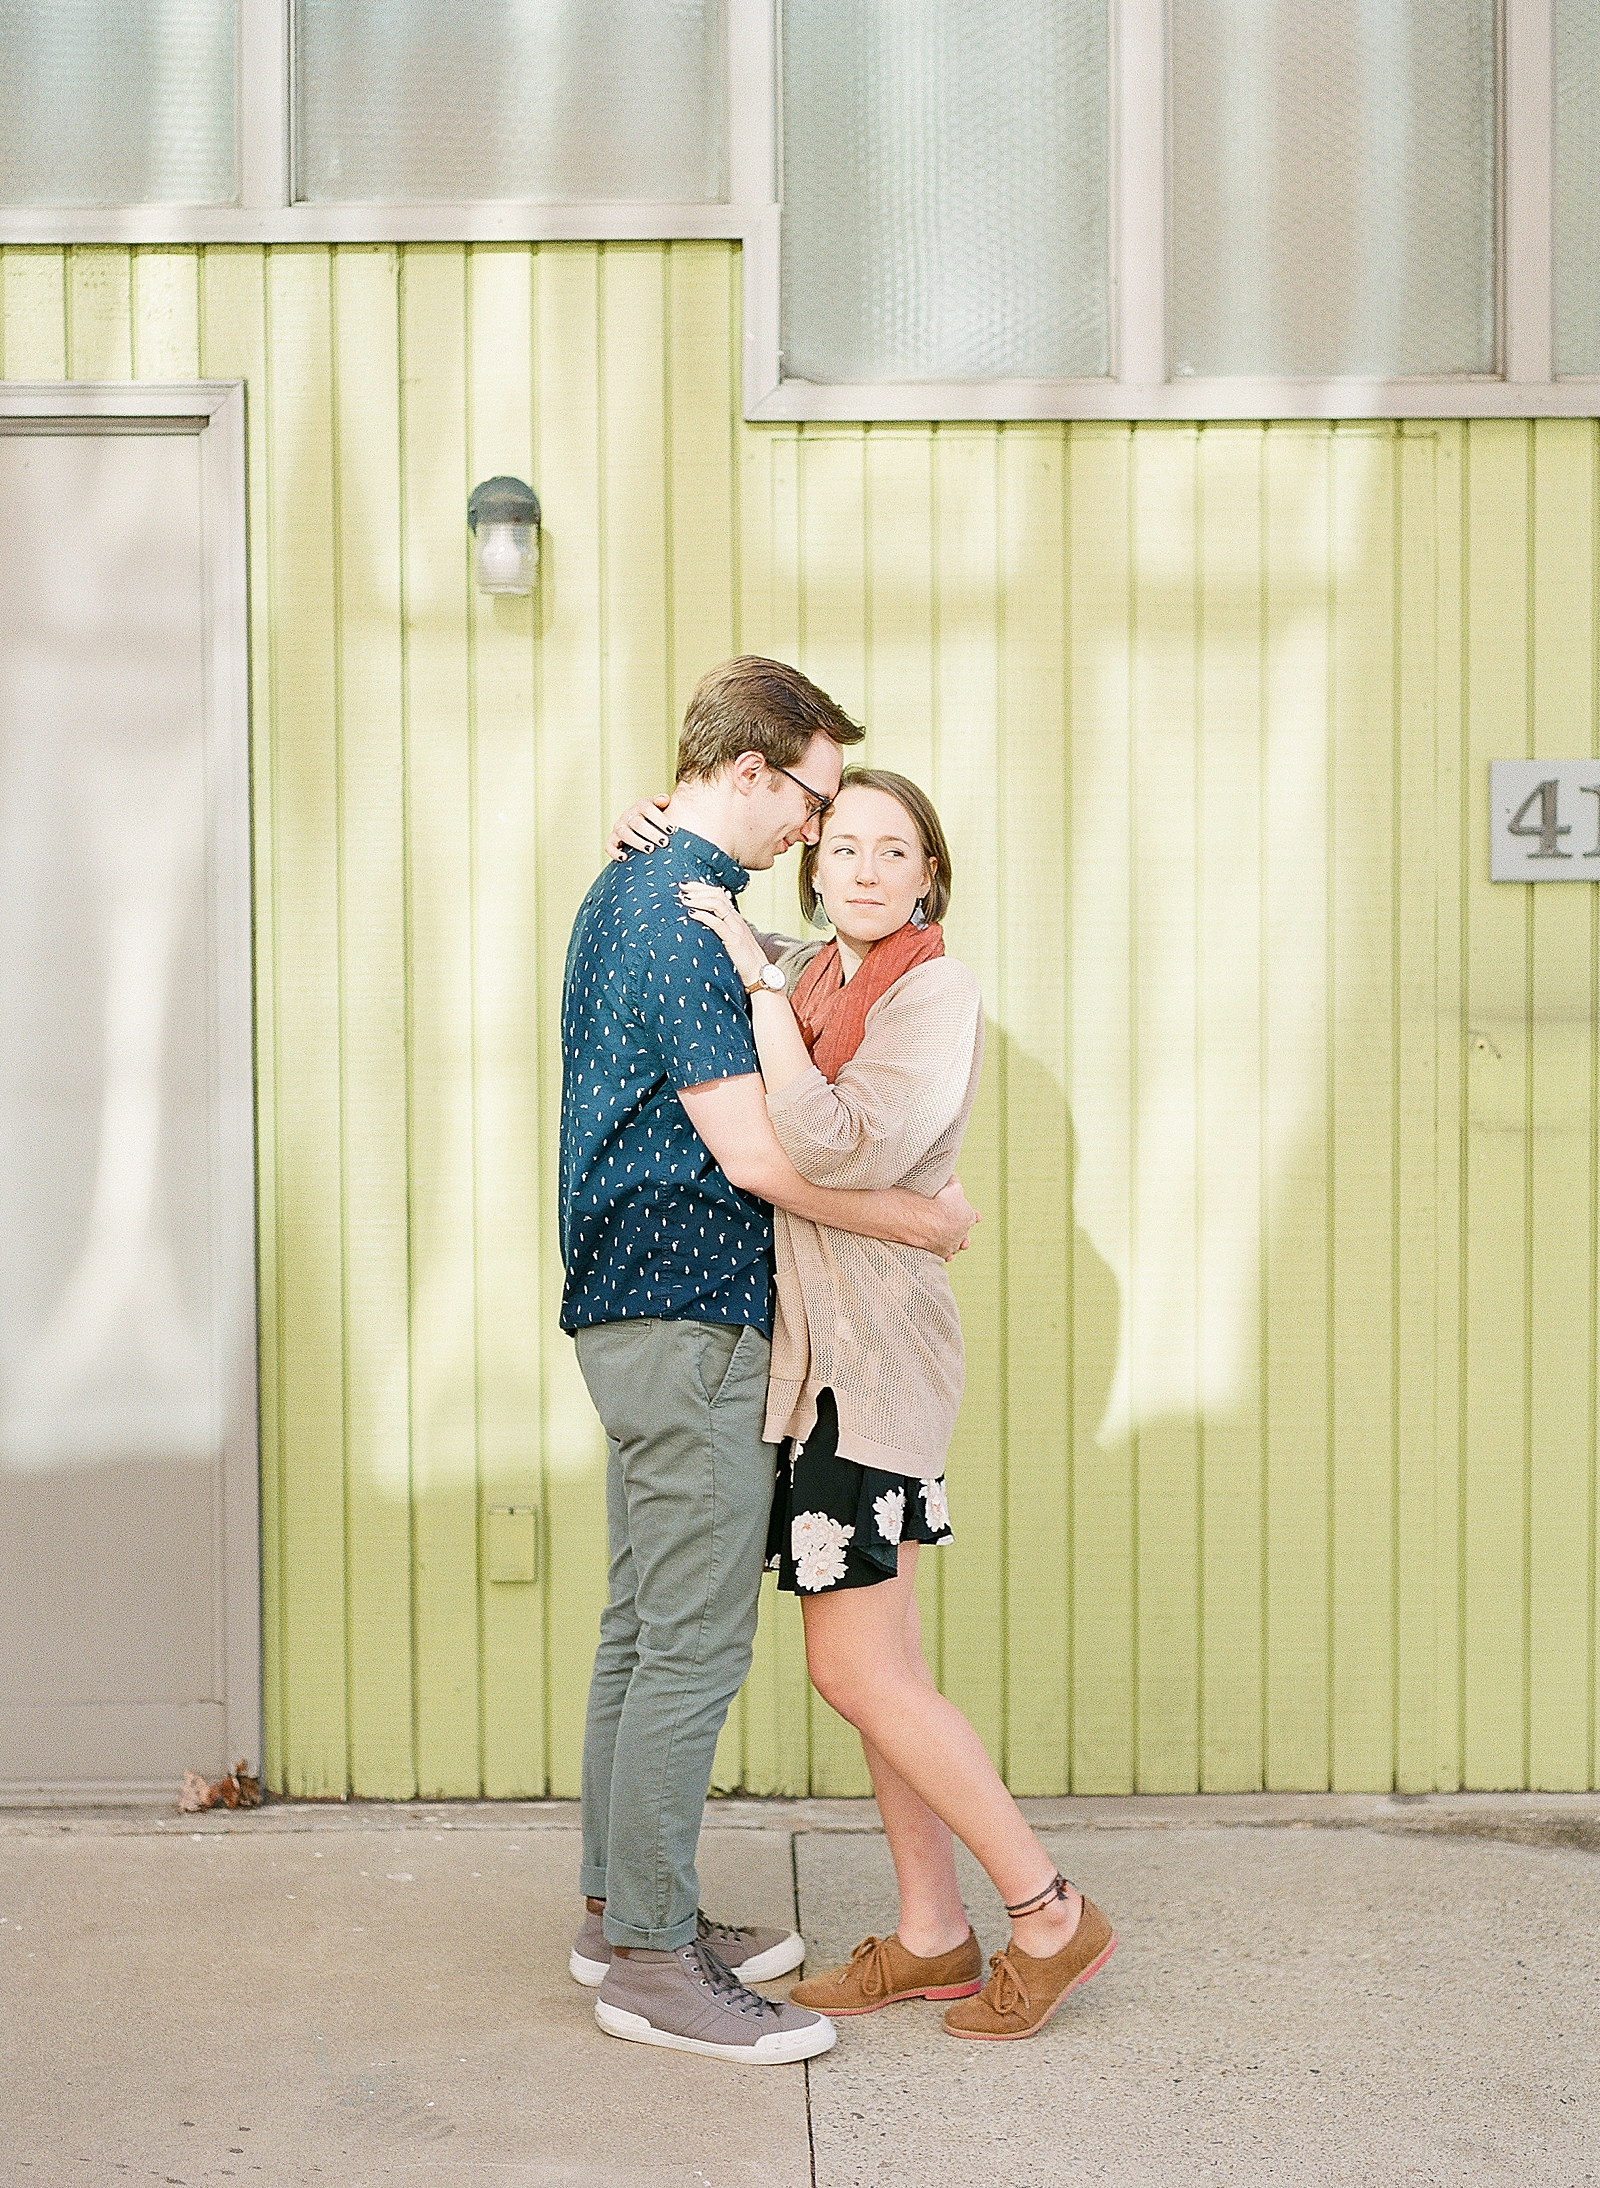 How To Have The Best Downtown Asheville Engagement Photo